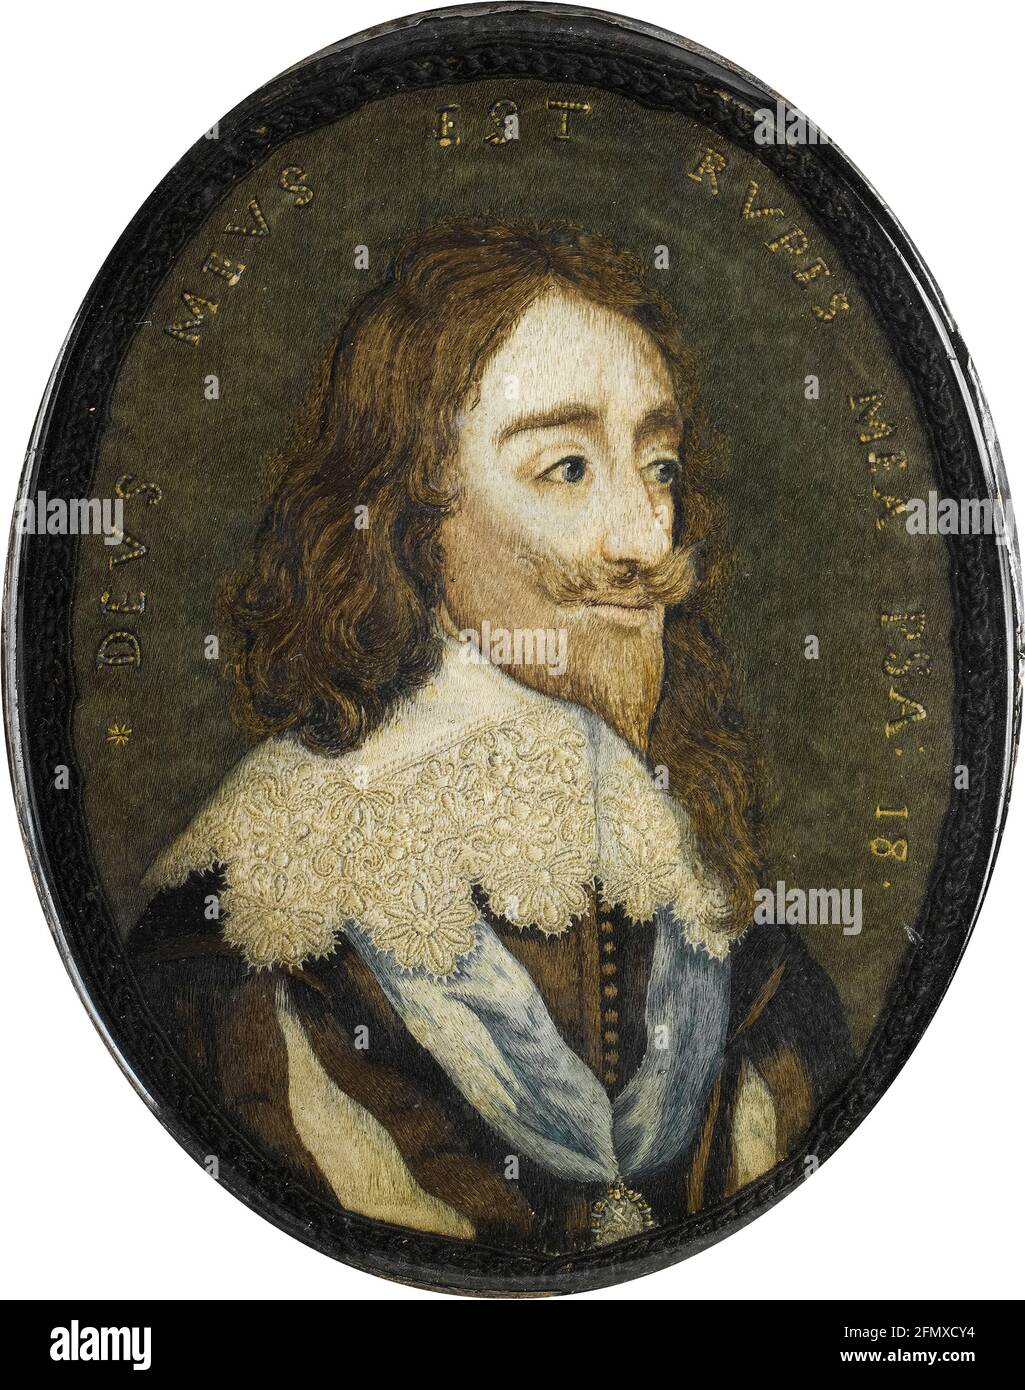 17th Century needlework portrait of Charles I (1600–1649), King of England, portrait miniature after an engraving by Wenceslaus Hollar, 1650-1670 Stock Photo